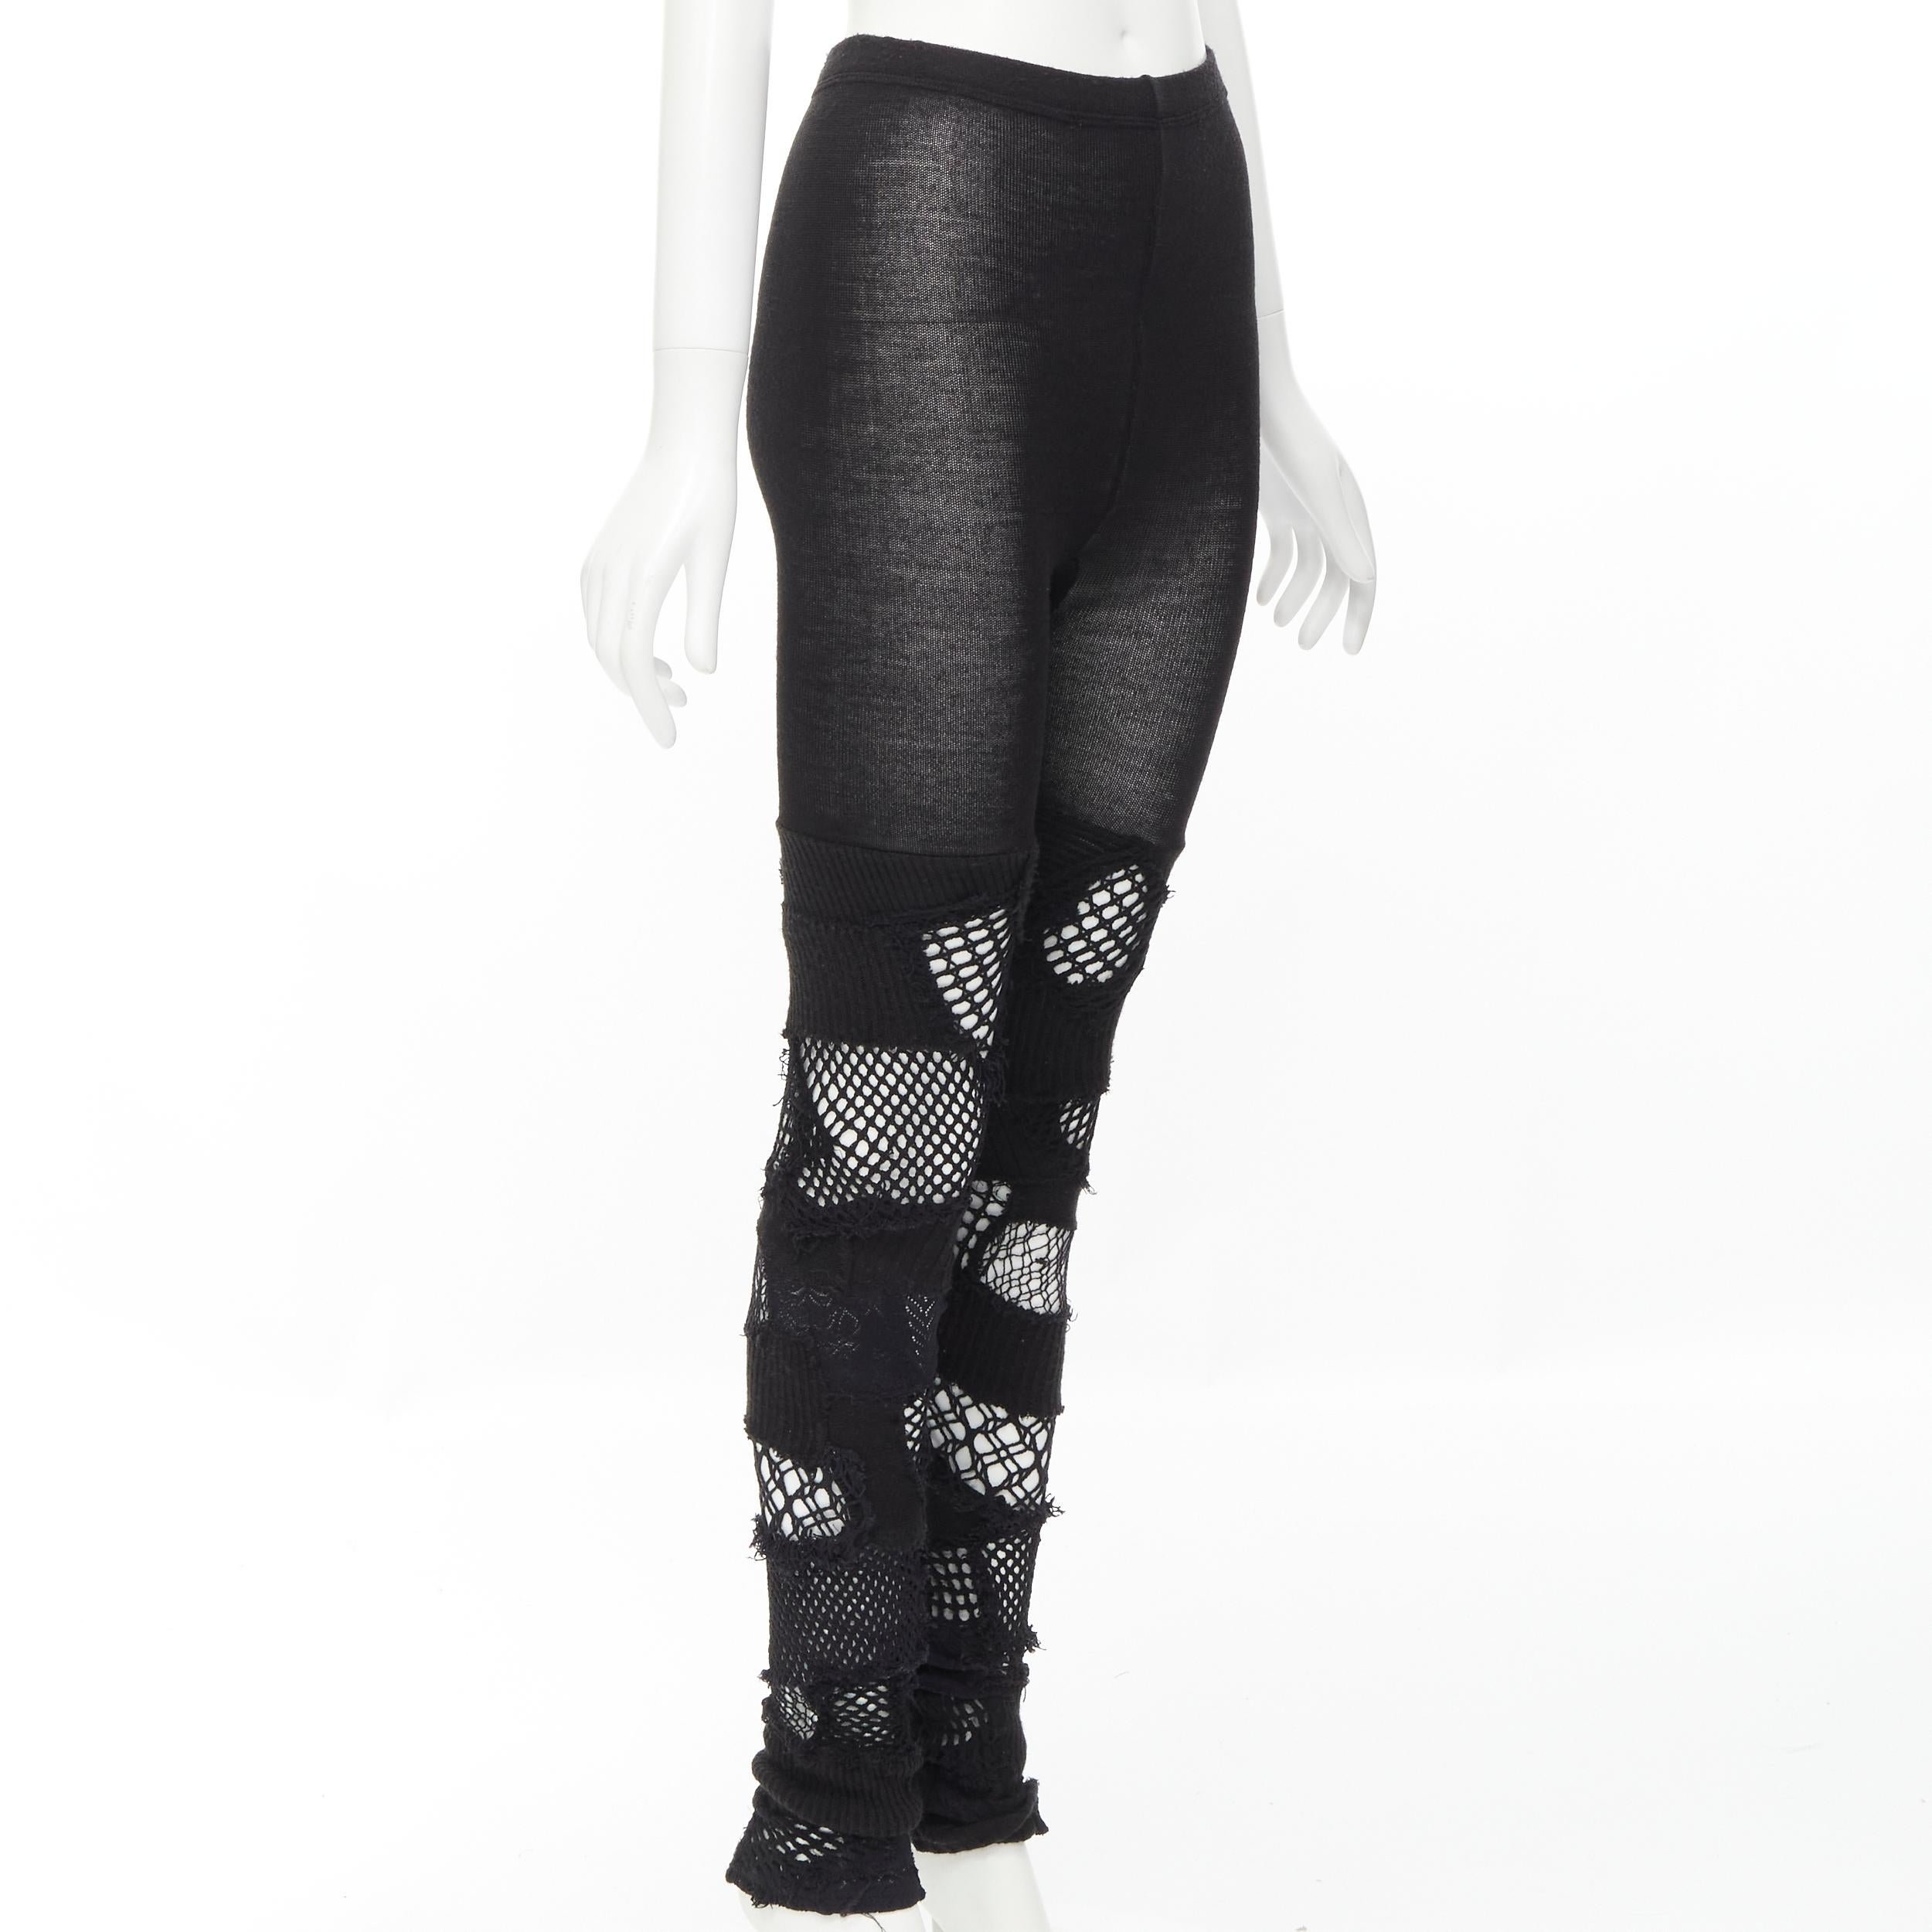 runway JUNYA WATANABE black fishnet deconstructed tights leggings pants S
Reference: TGAS/B02252
Brand: Junya Watanabe
Designer: Junya Watanabe
Model: Punk tights
Collection: AD2006 - Runway
Material: Wool
Color: Black
Pattern: Solid
Extra Details: